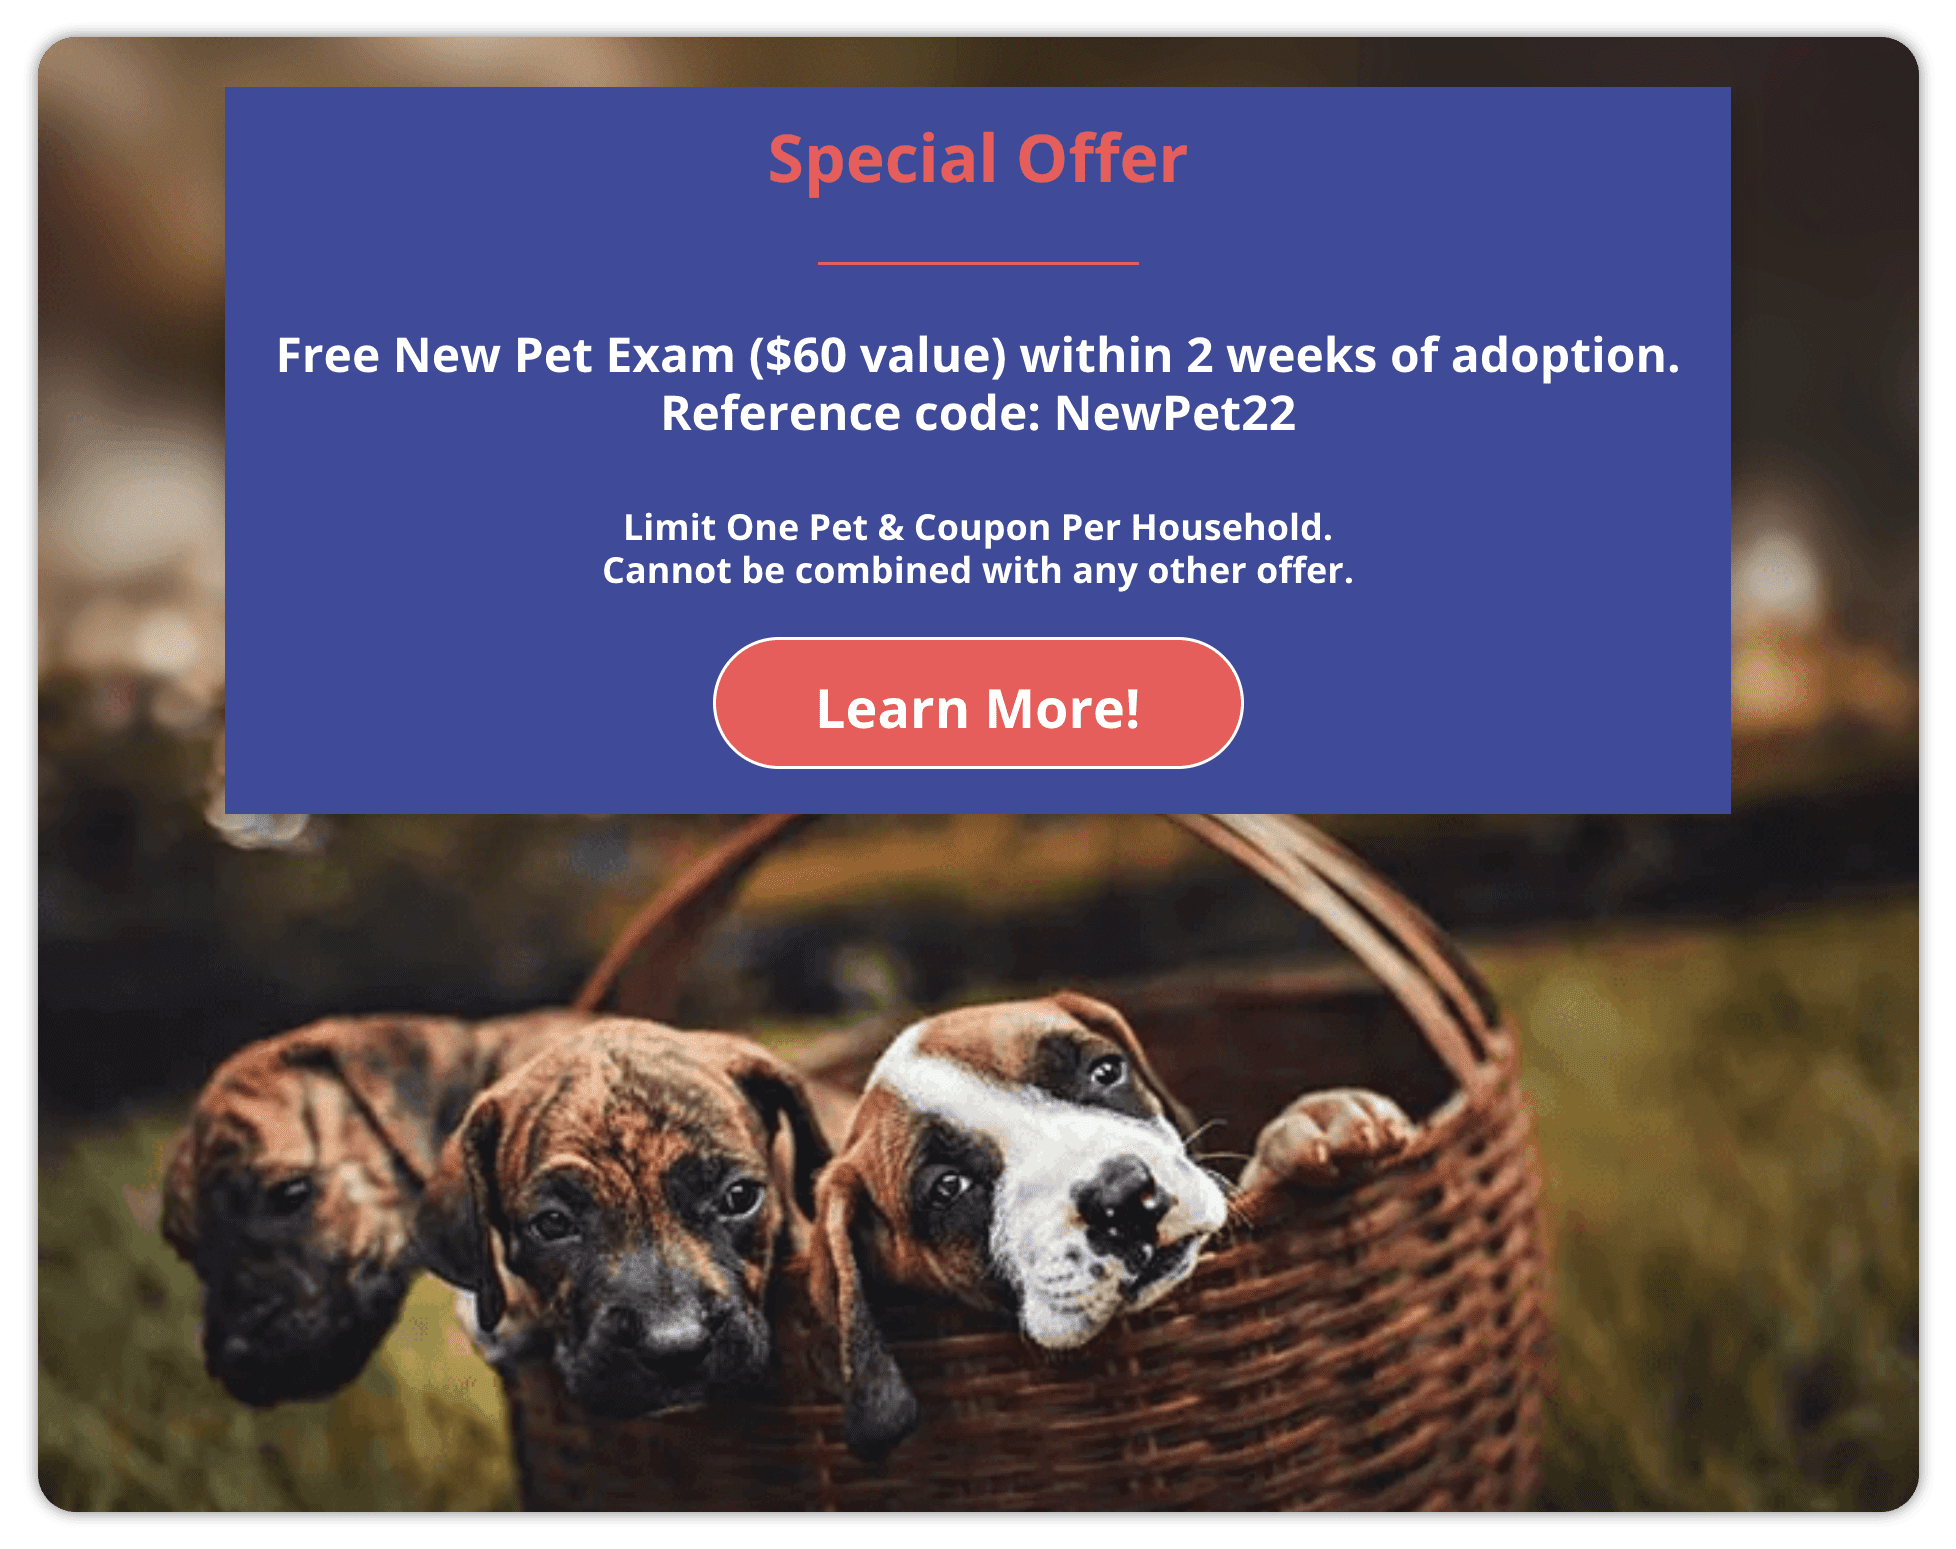 Special Offer! $1 New Client Exam!